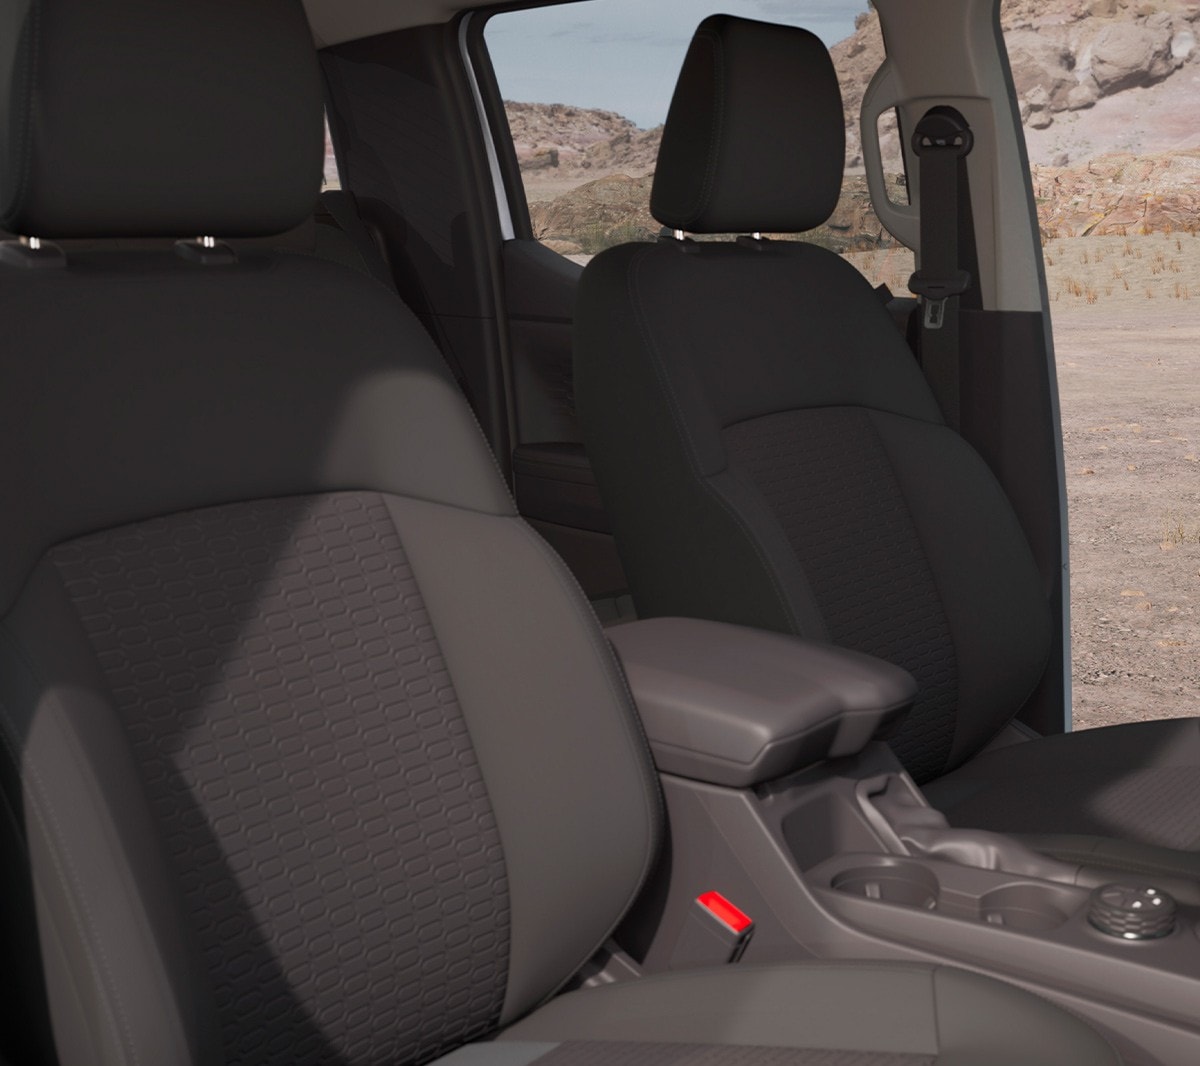 All-New Ford Ranger in Moondust Silver front seats